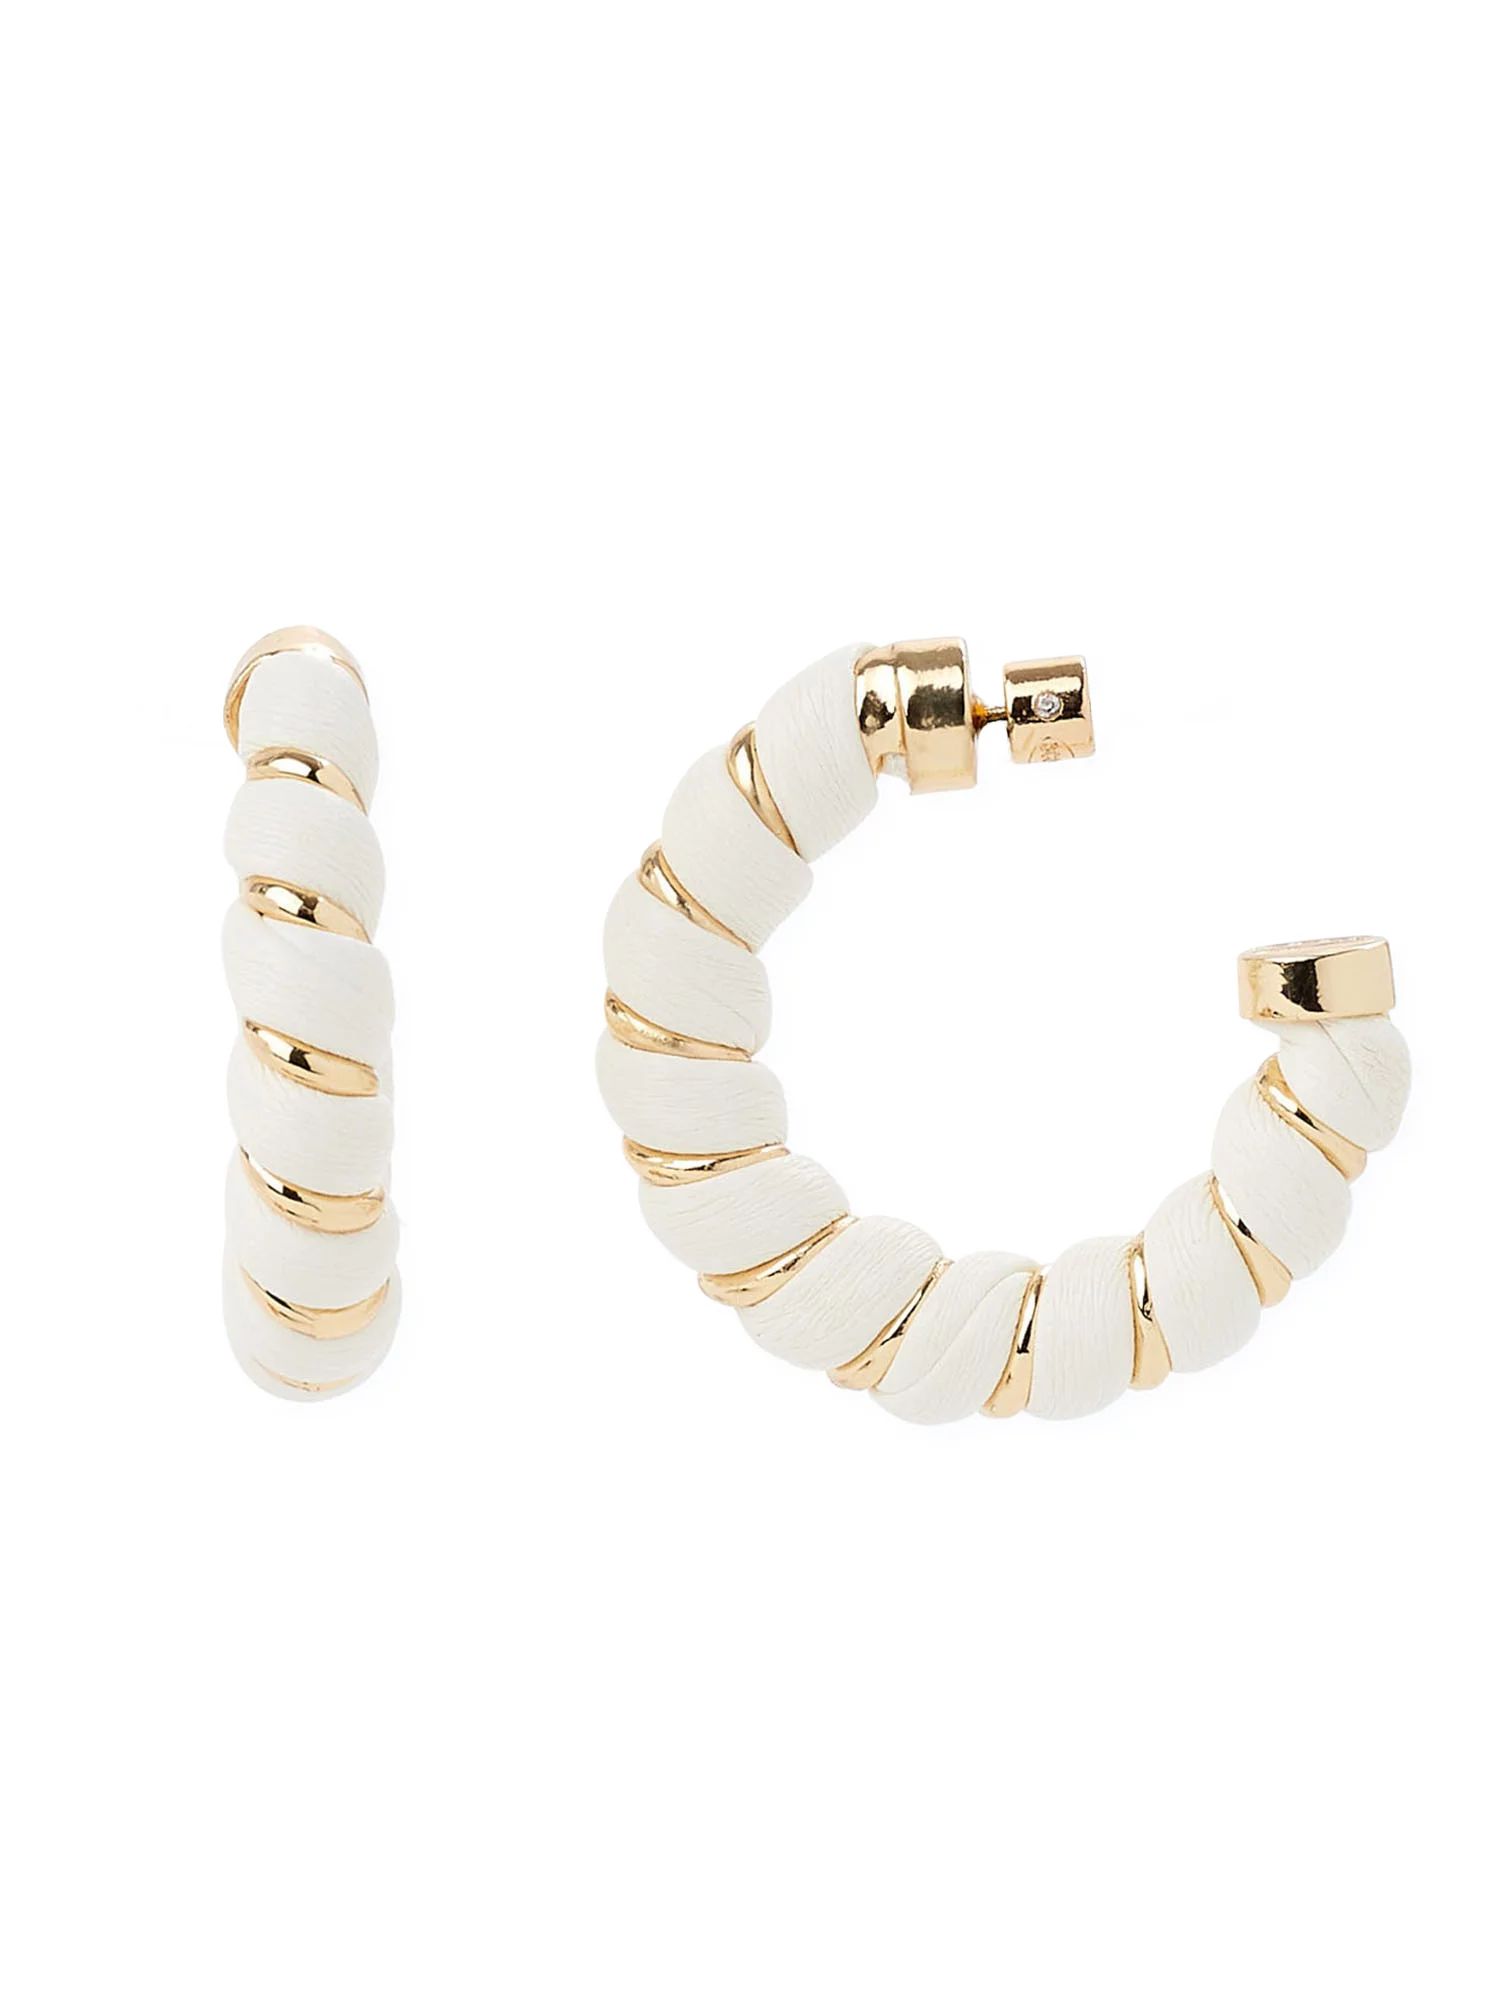 Scoop Women’s White Twisted Faux Leather and 14K Gold Flash-Plated Hoop Earrings | Walmart (US)